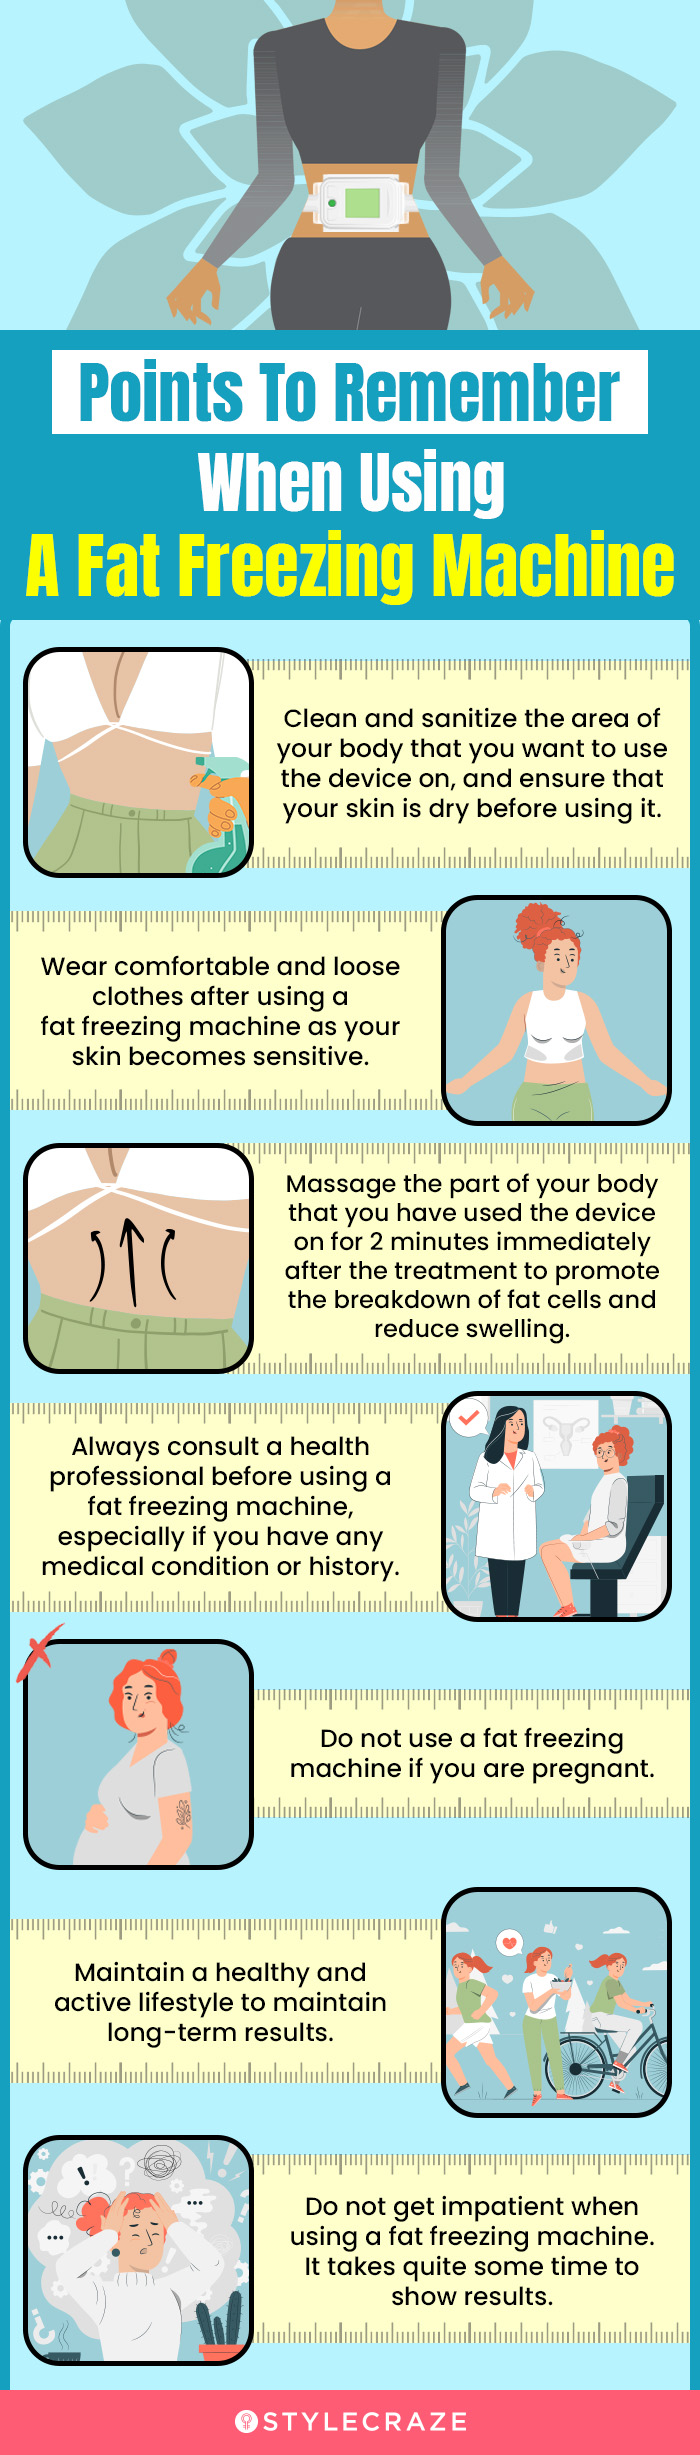 Points To Remember When Using A Fat Freezing Machine